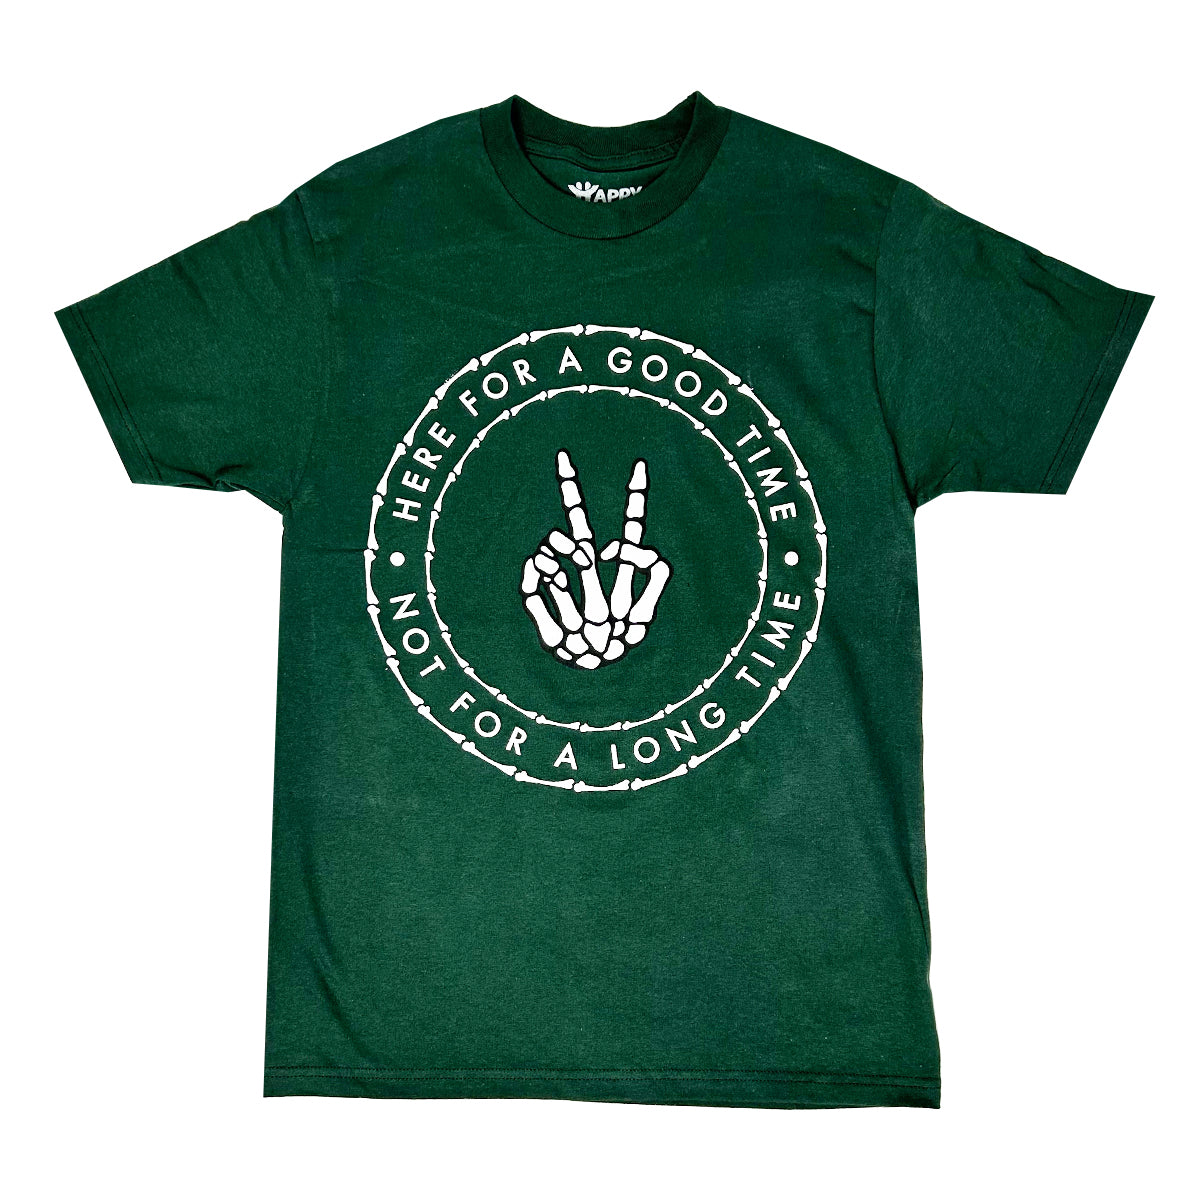 Here For Good Times Green Short Sleeve T-SHIRT 100% Cotton- Pack of 6 Units 1S, 2M, 2L, 1XL